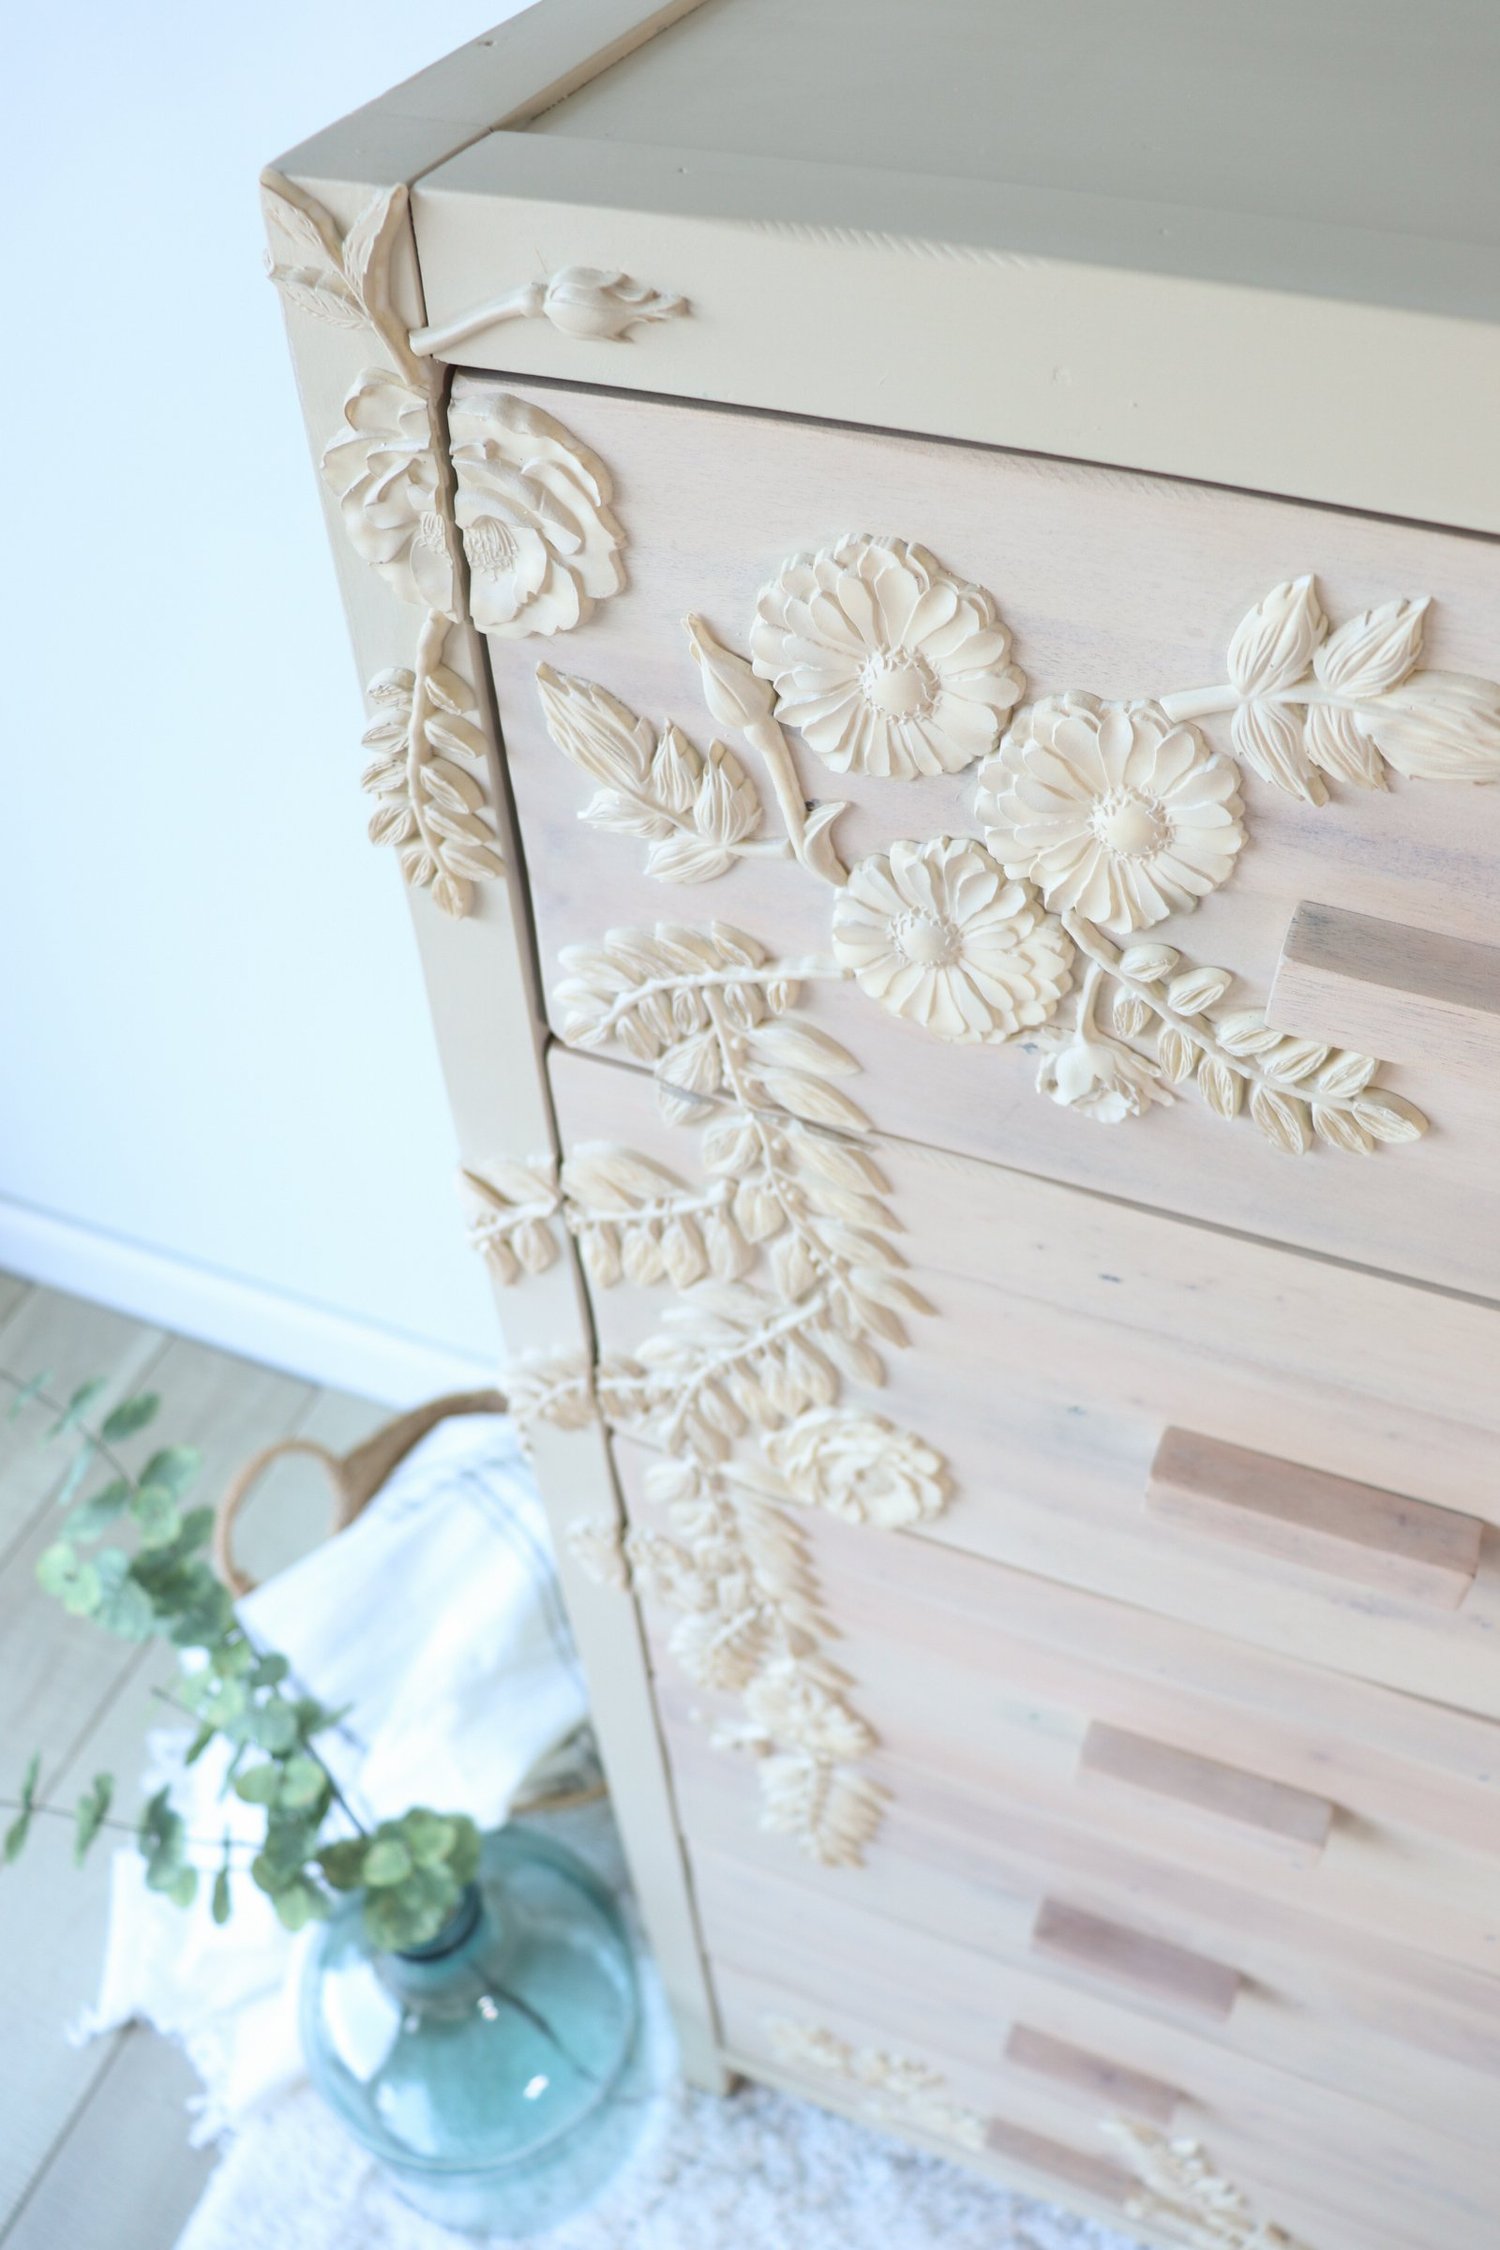 My Anthropologie Enchantment Dresser Dupe With Decor Moulds